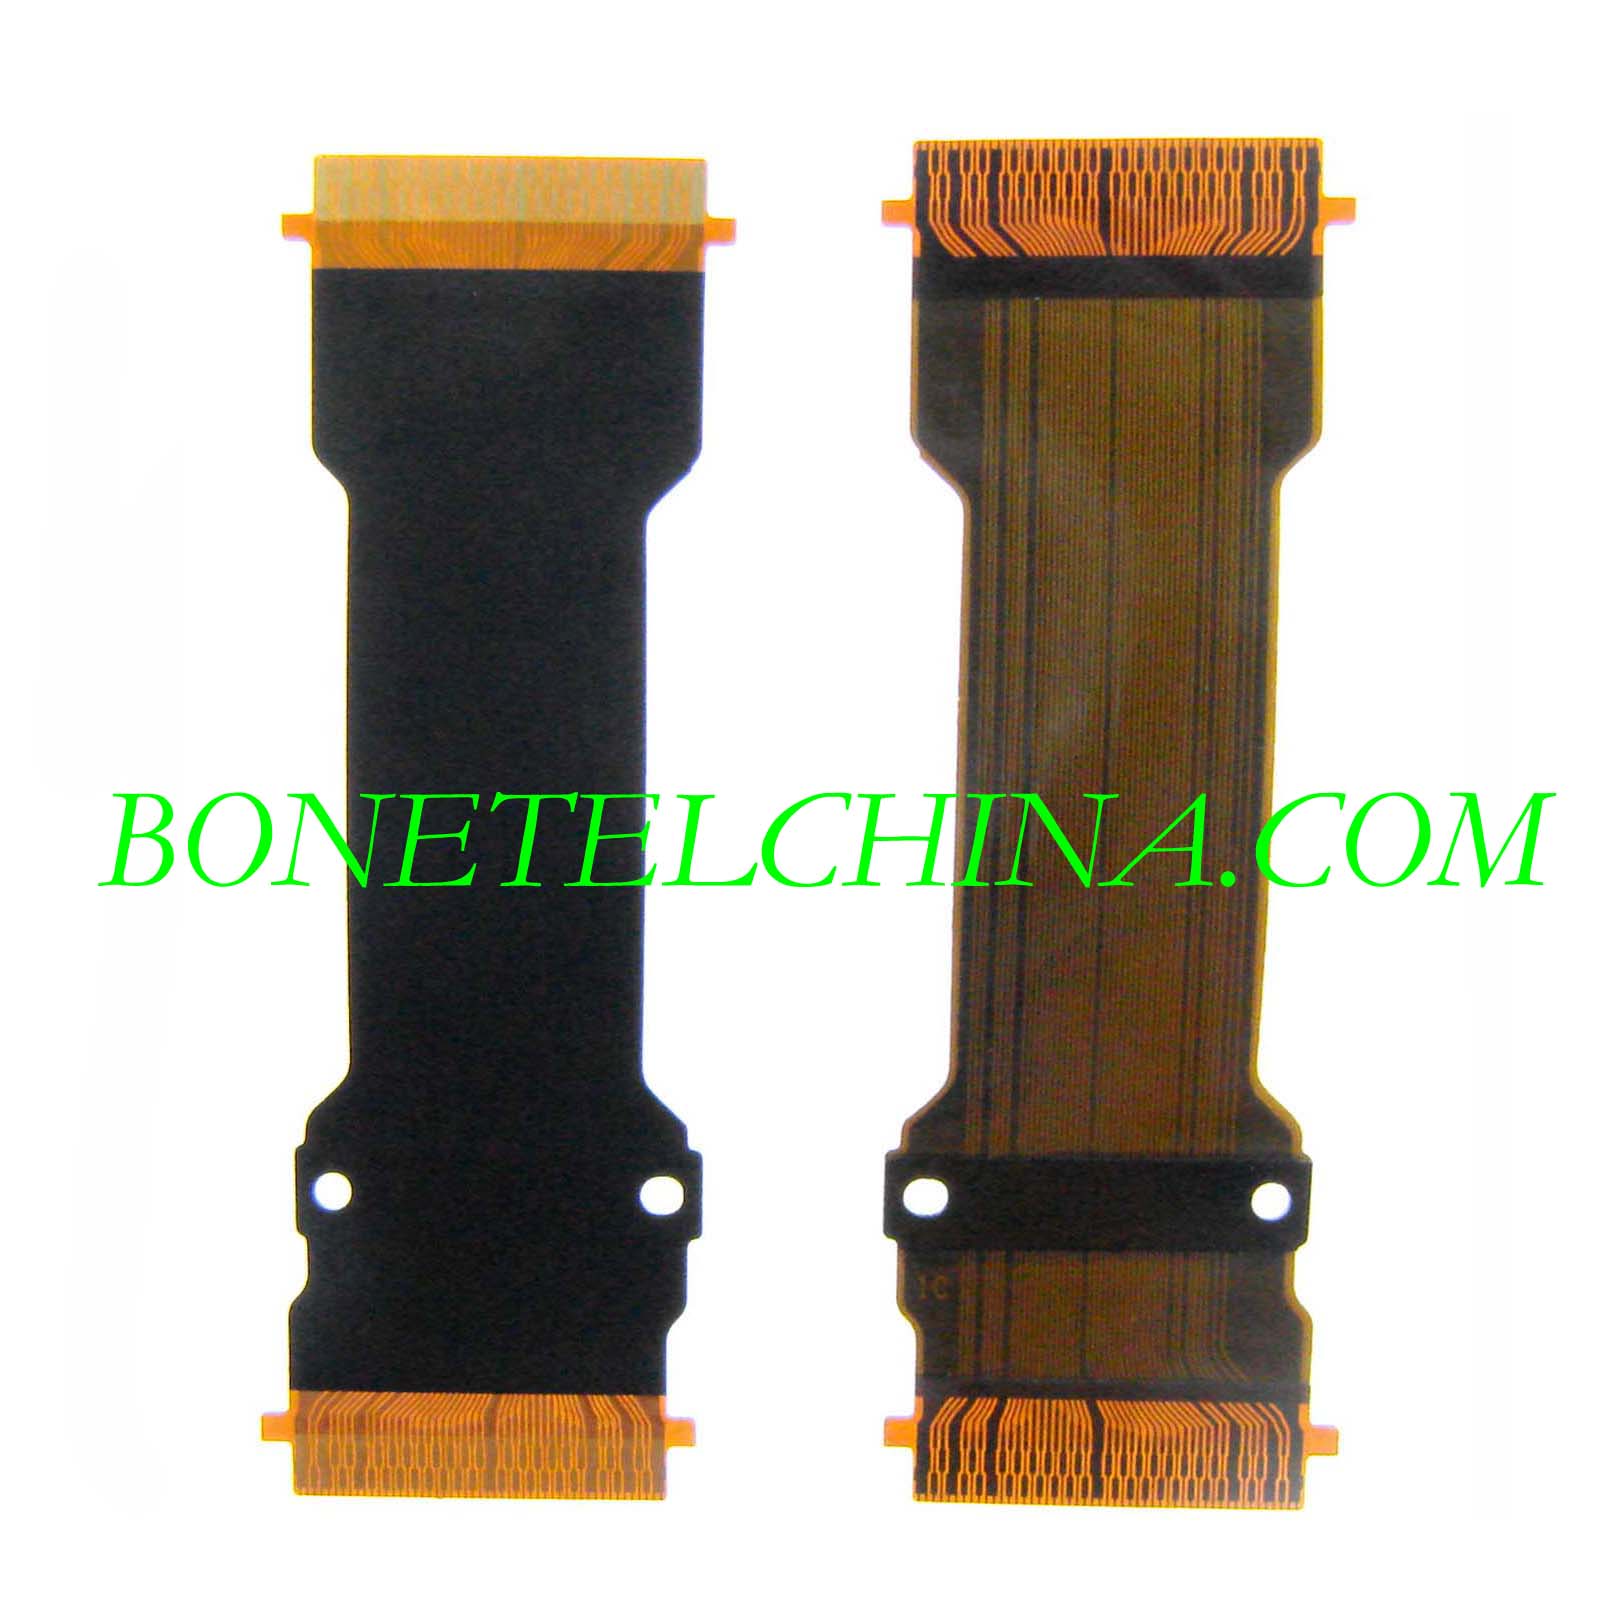 W595 main board Mobile phone Flex Cables for Sony Ericsson